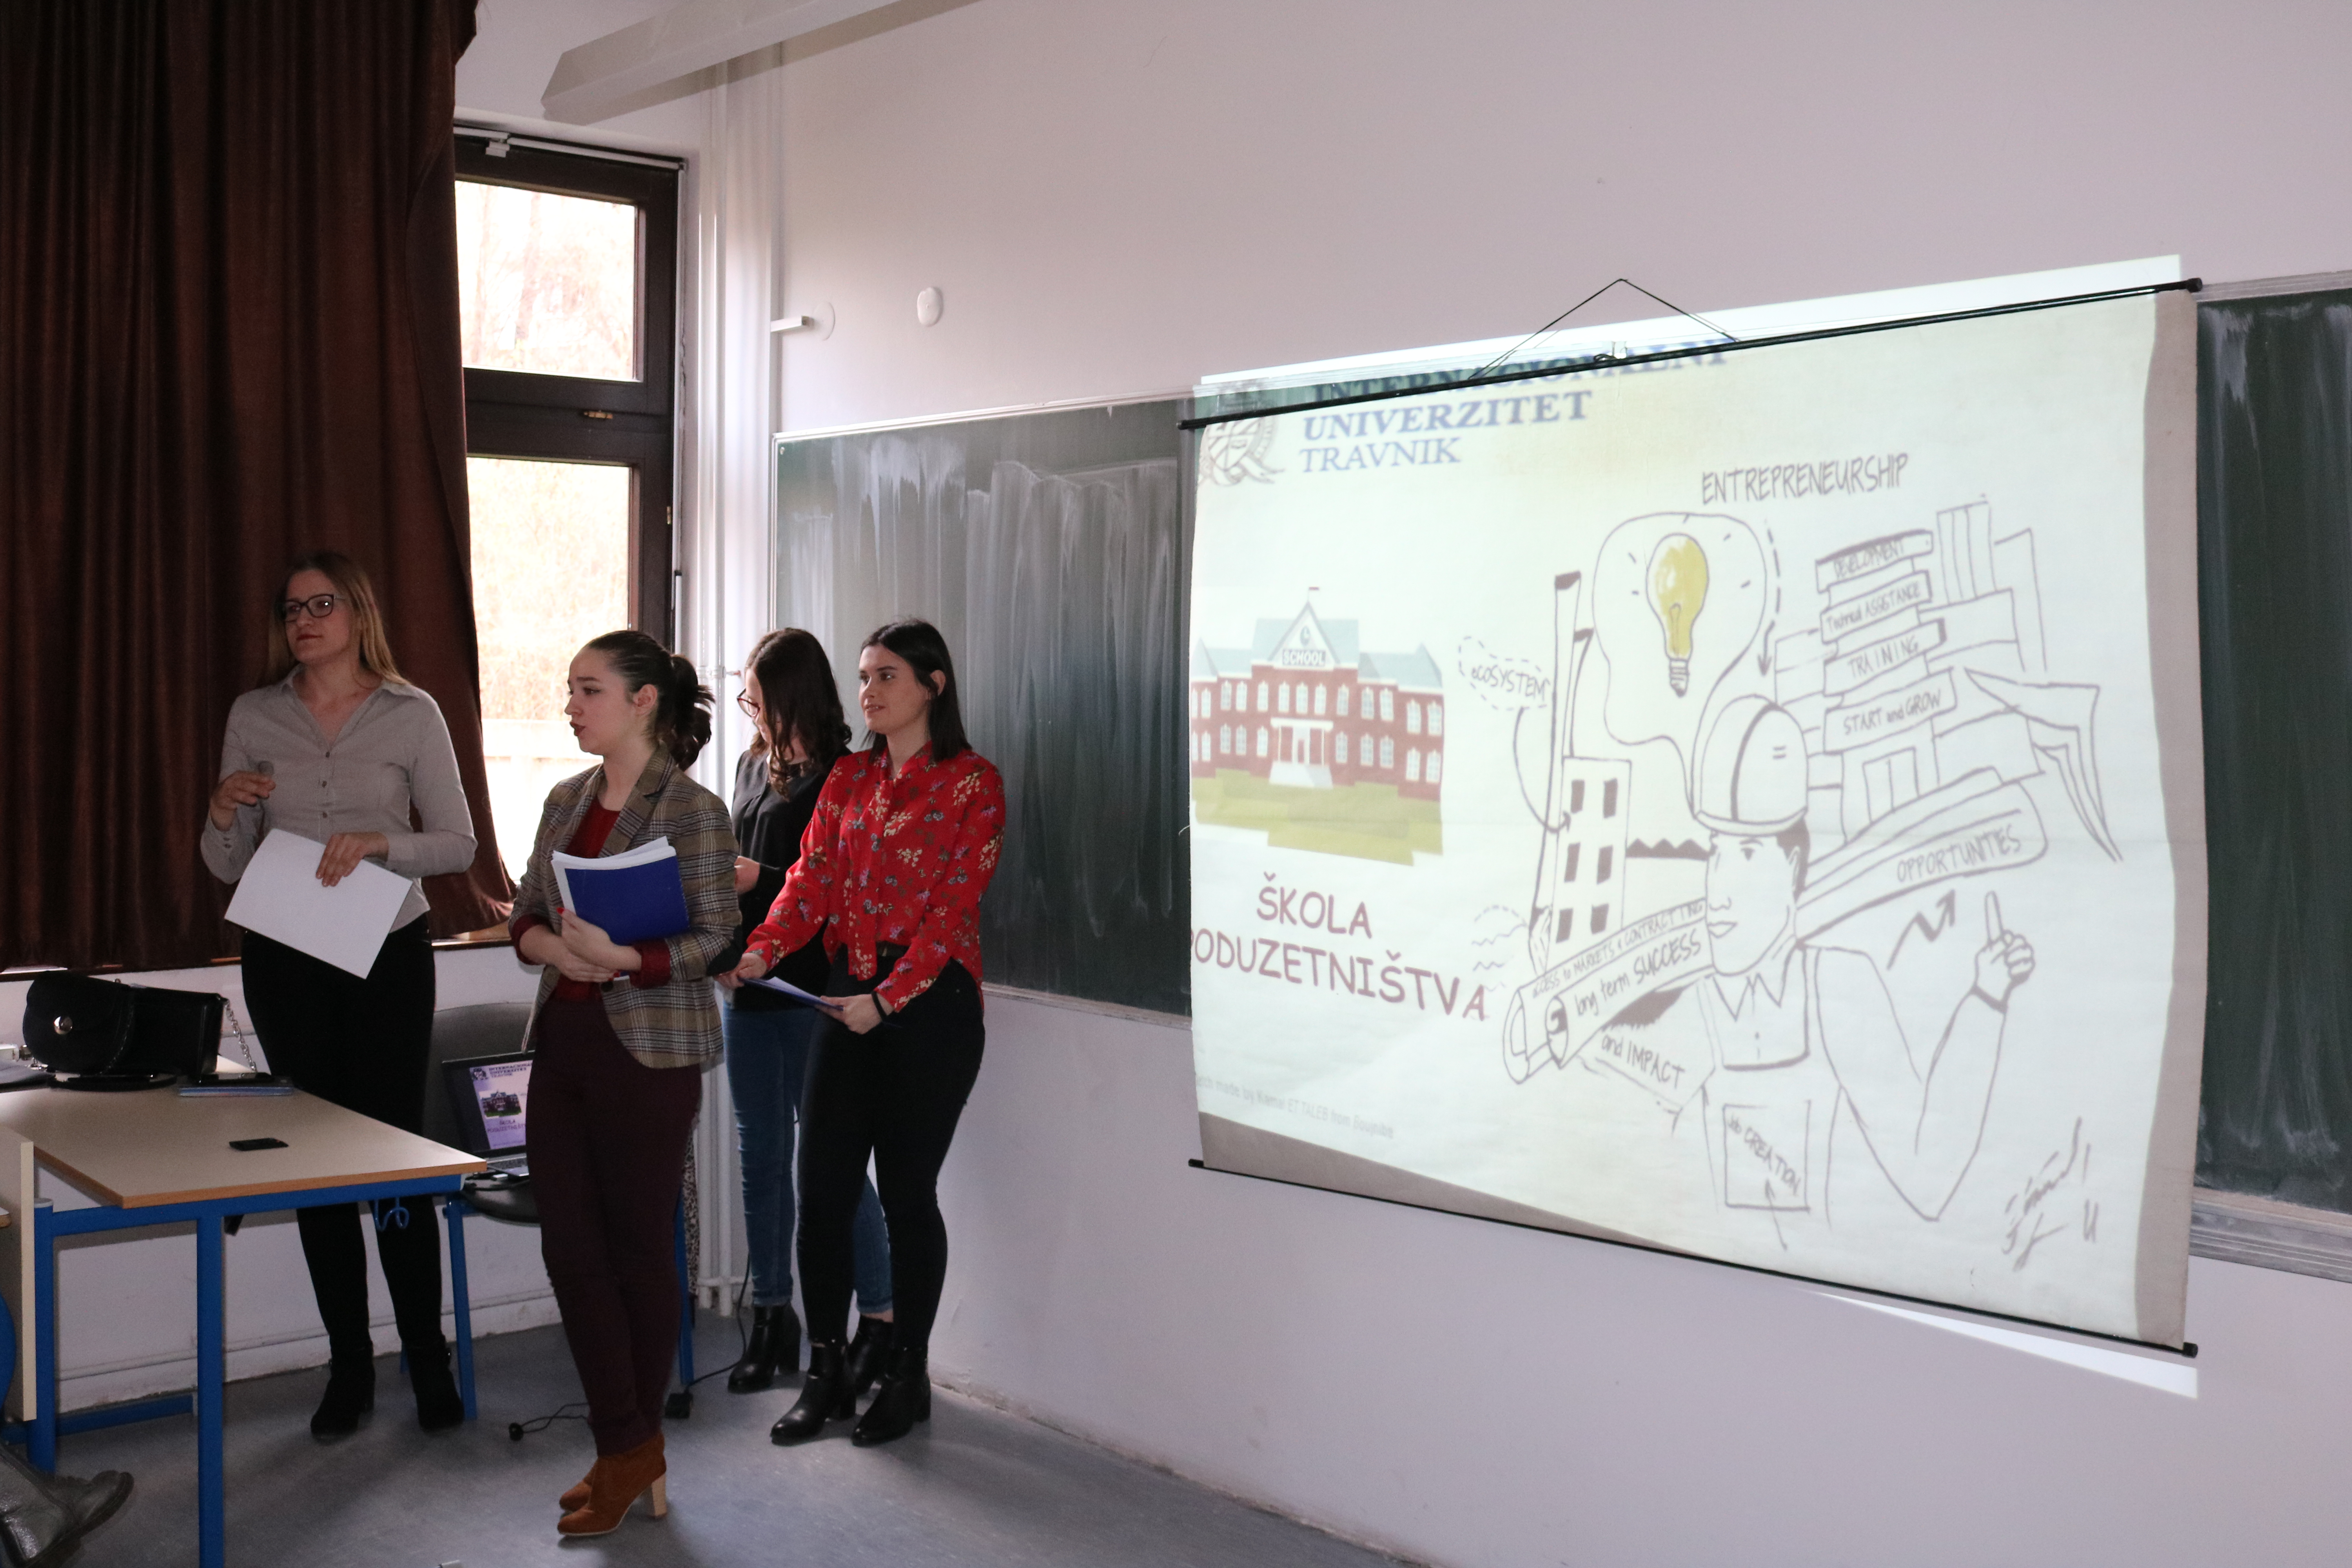 Students From The Faculty Of Economics In Travnik Organized A Workshop “Small School Of Entrepreneurship” For High School Students